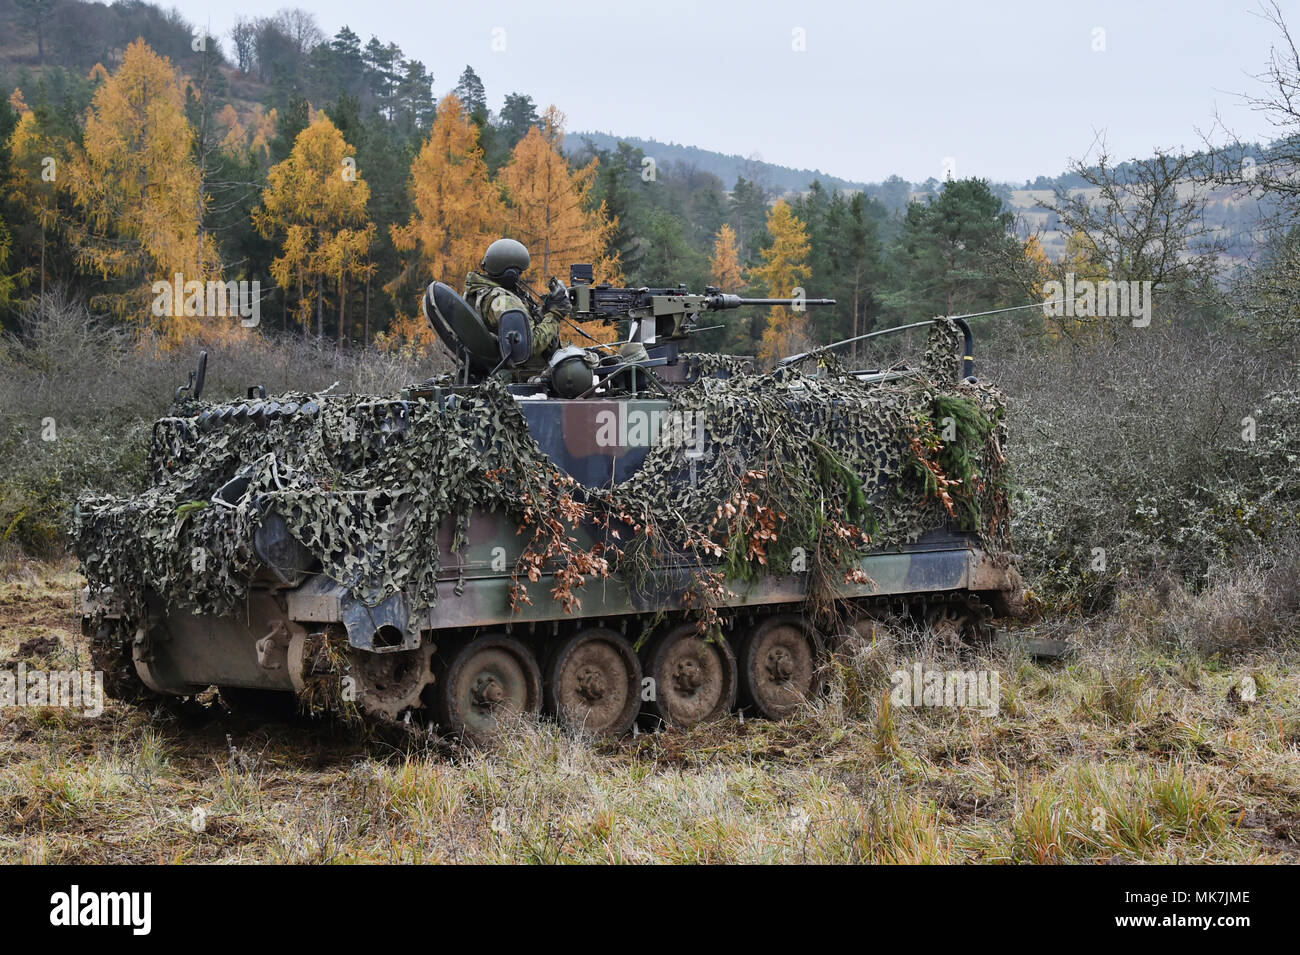 Lithuanian soldiers maneuver their tracked armored vehicle during Exercise Allied Spirit VII at the 7th Army Training Command’s Hohenfels Training Area, Germany, Nov. 16, 2017. Approximately 4,050 service members from 13 nations are participating in the exercise from Oct. 30 to Nov. 22, 2017. Allied Spirit is a U.S. Army Europe-directed, 7ATC-conducted multinational exercise series designed to develop and enhance NATO and key partner’s interoperability and readiness. (U.S. Army photo by Gertrud Zach) Stock Photo